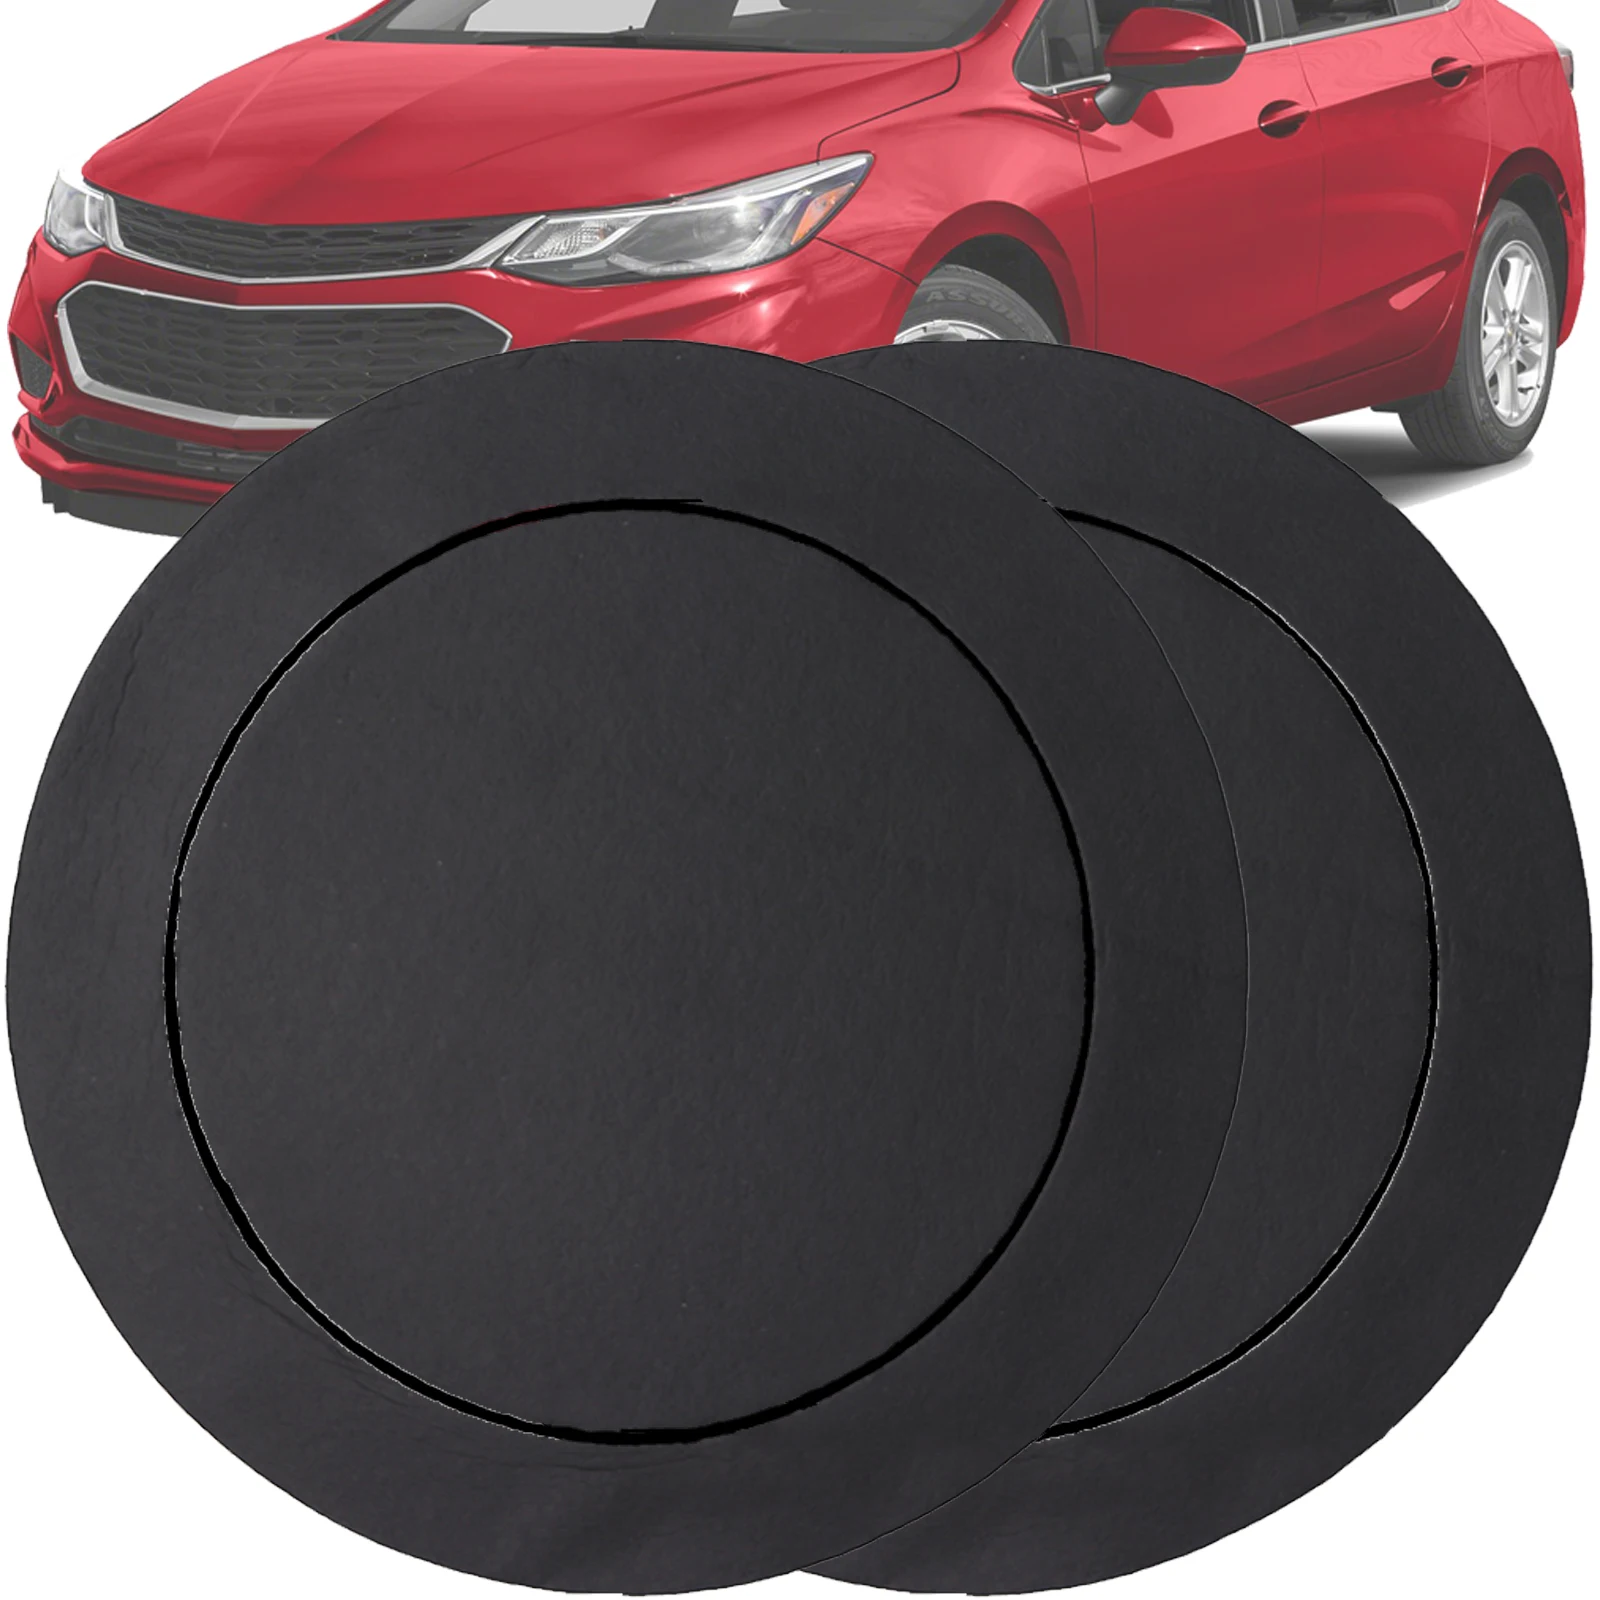 

2x Car Speaker Ring Sound Insulation Self-Adhesive Bass 6.5” For Chevrolet Holden Cruze J300 2008 - 2016 Daewoo Lacetti Premiere